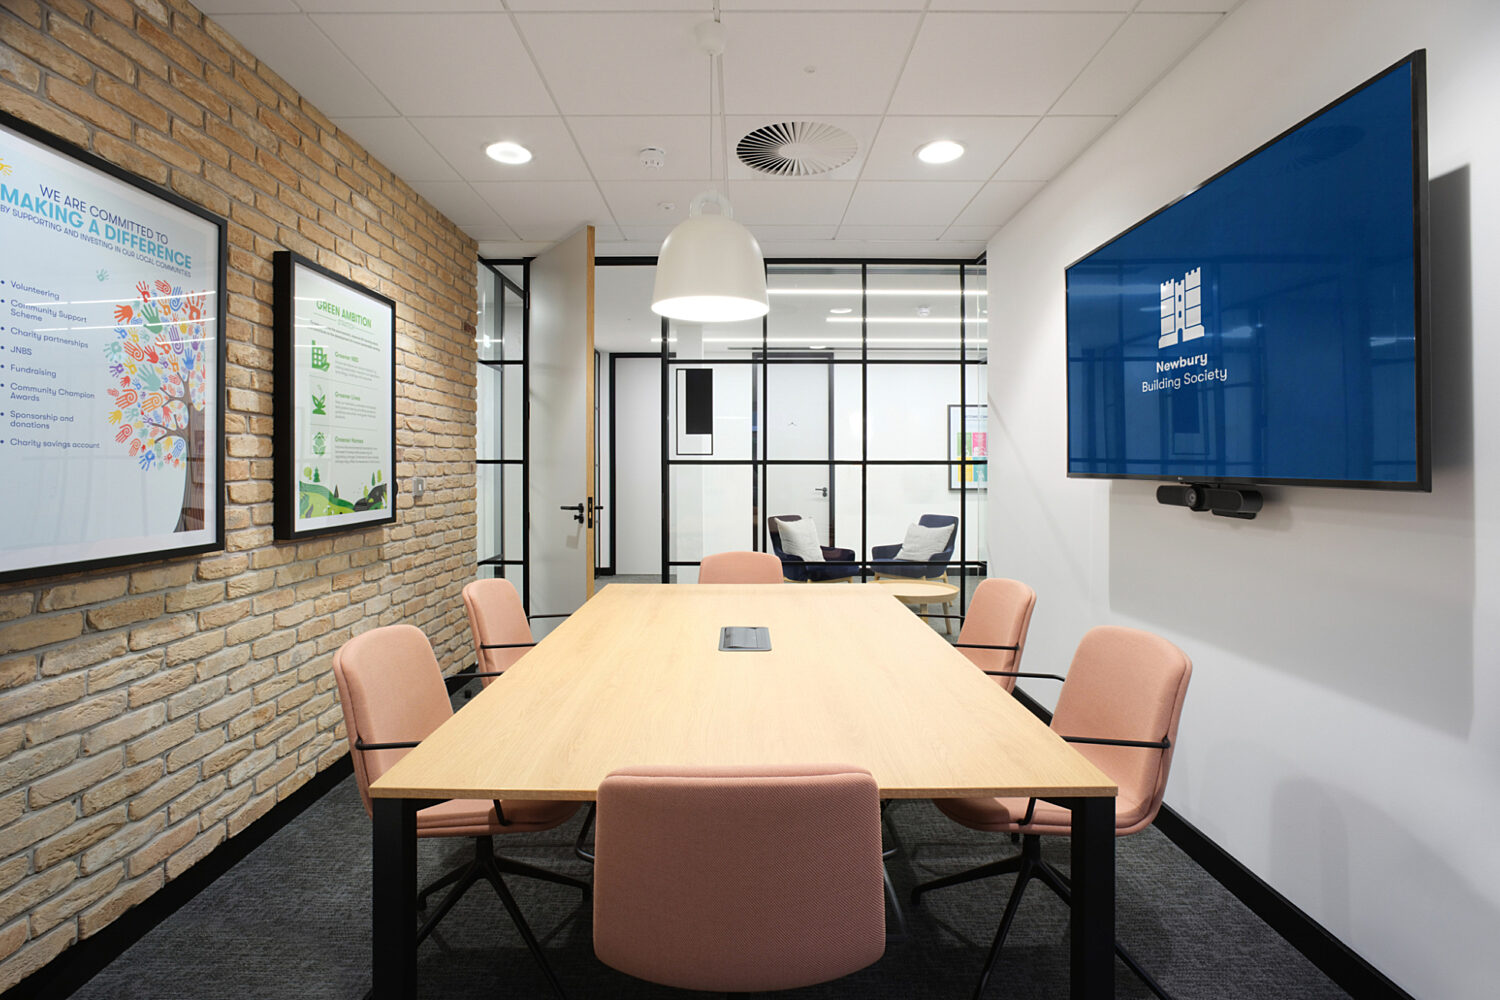 A small pastel meeting room with exposed brickwork and TV